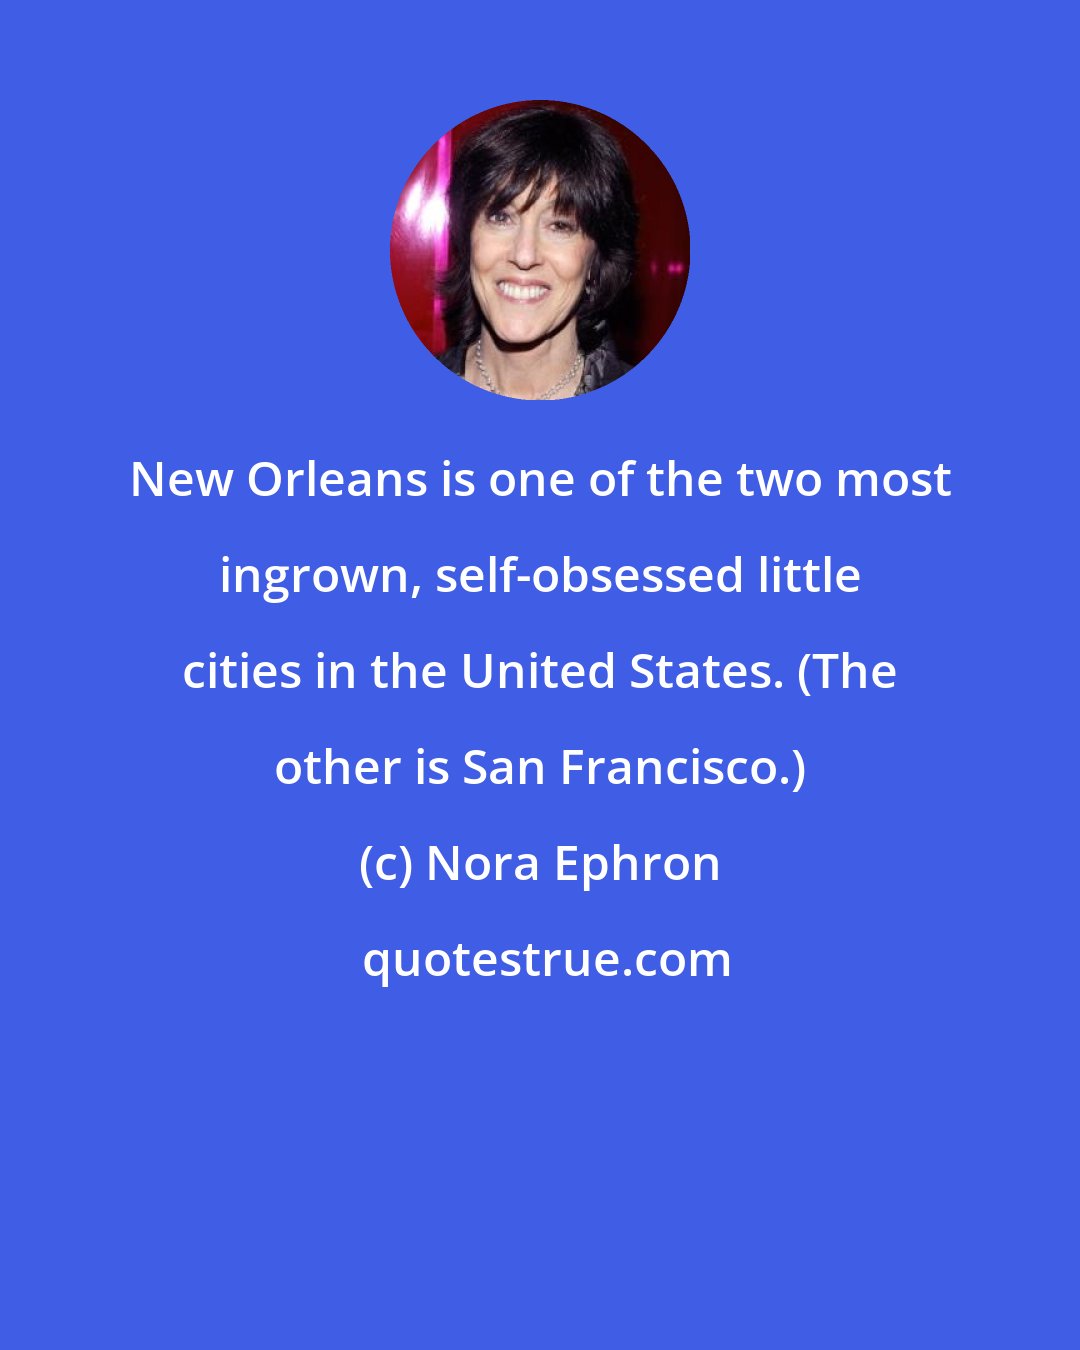 Nora Ephron: New Orleans is one of the two most ingrown, self-obsessed little cities in the United States. (The other is San Francisco.)